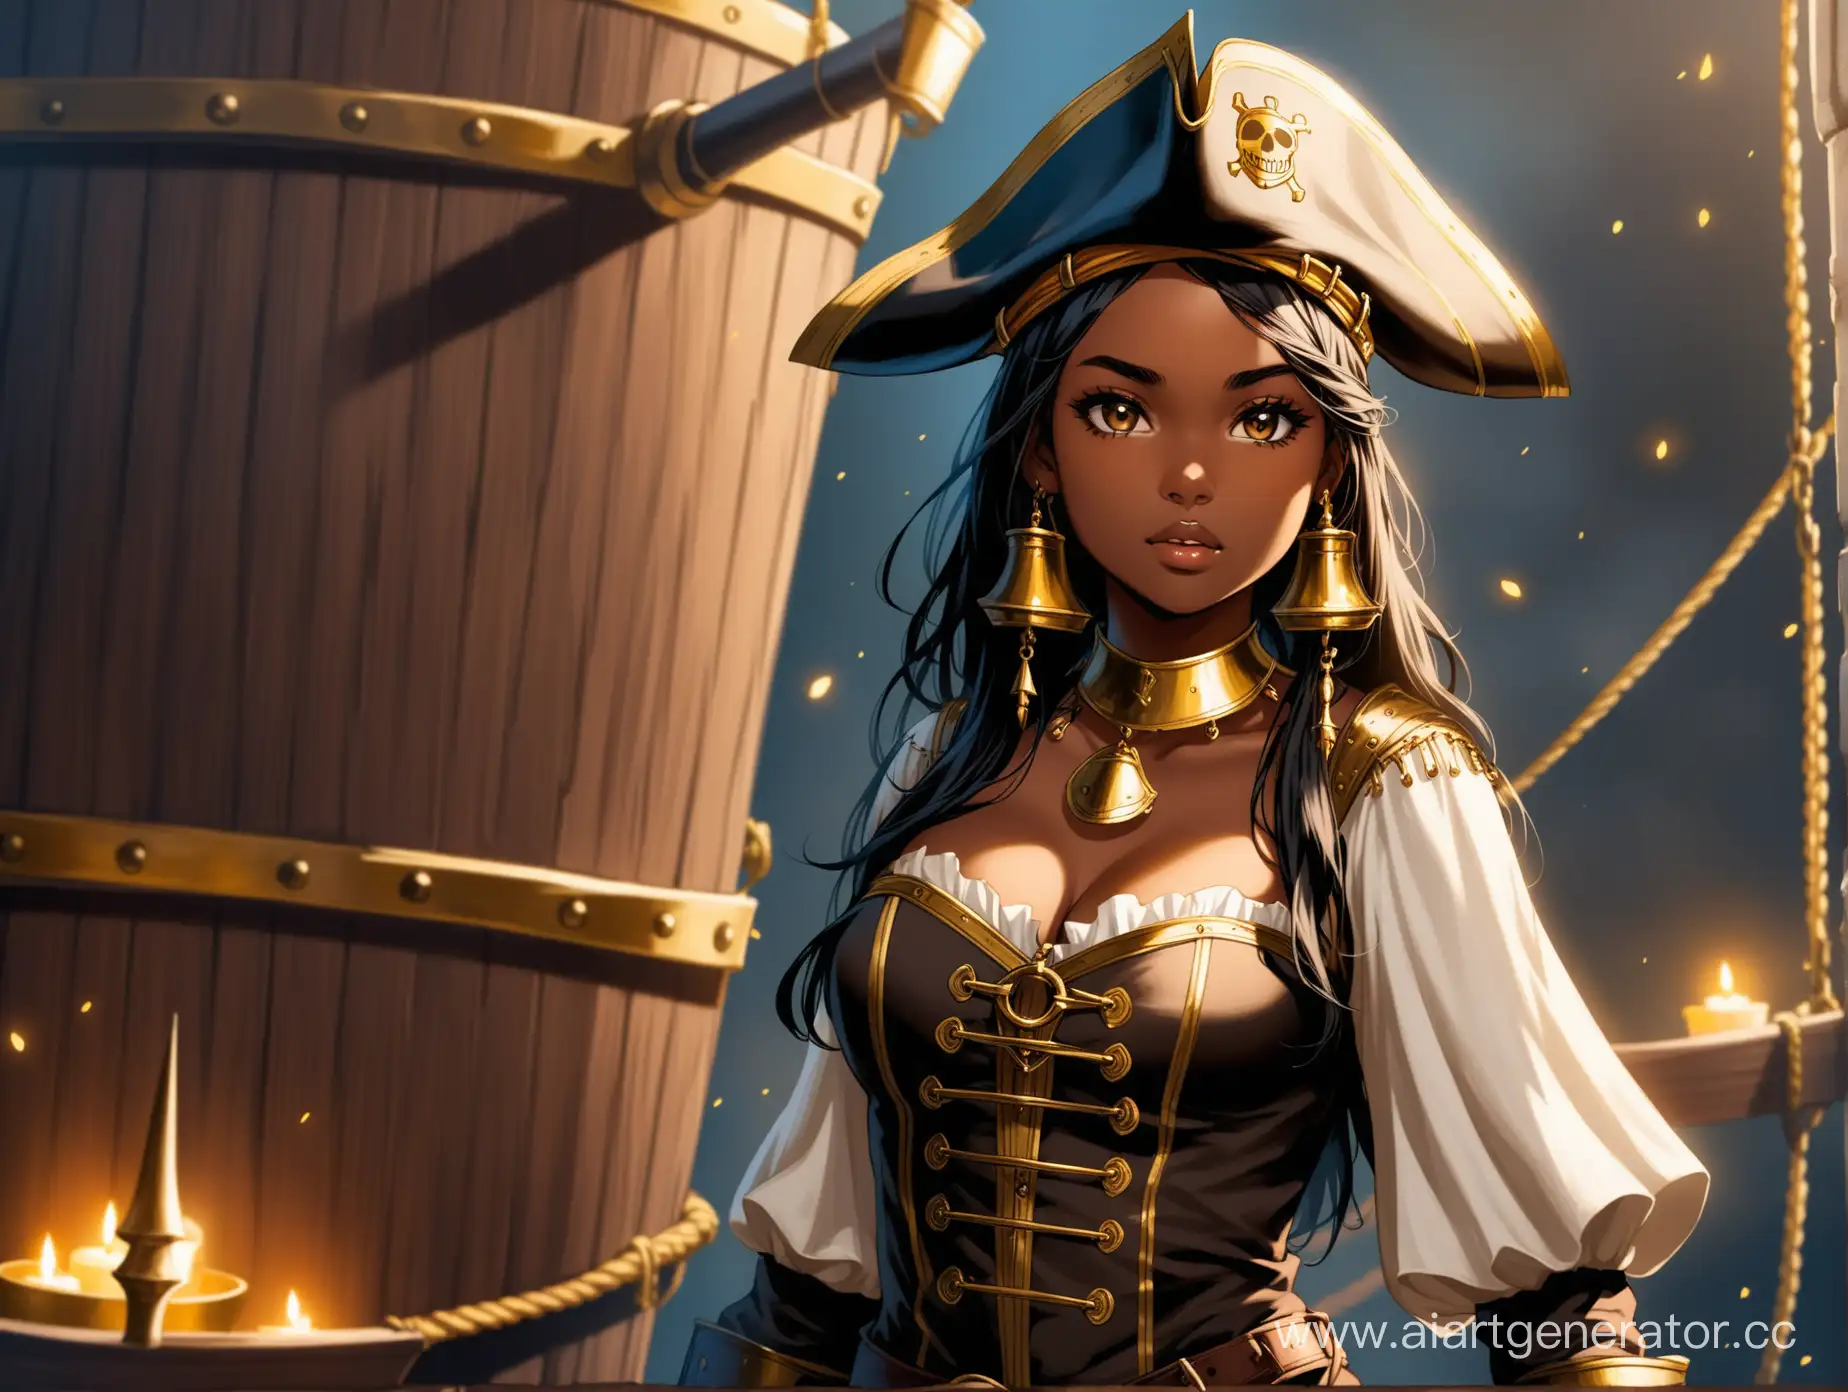 DarkSkinned-Pirate-Girl-with-Golden-Ornaments-in-Medieval-Fantasy-Ship-Hold